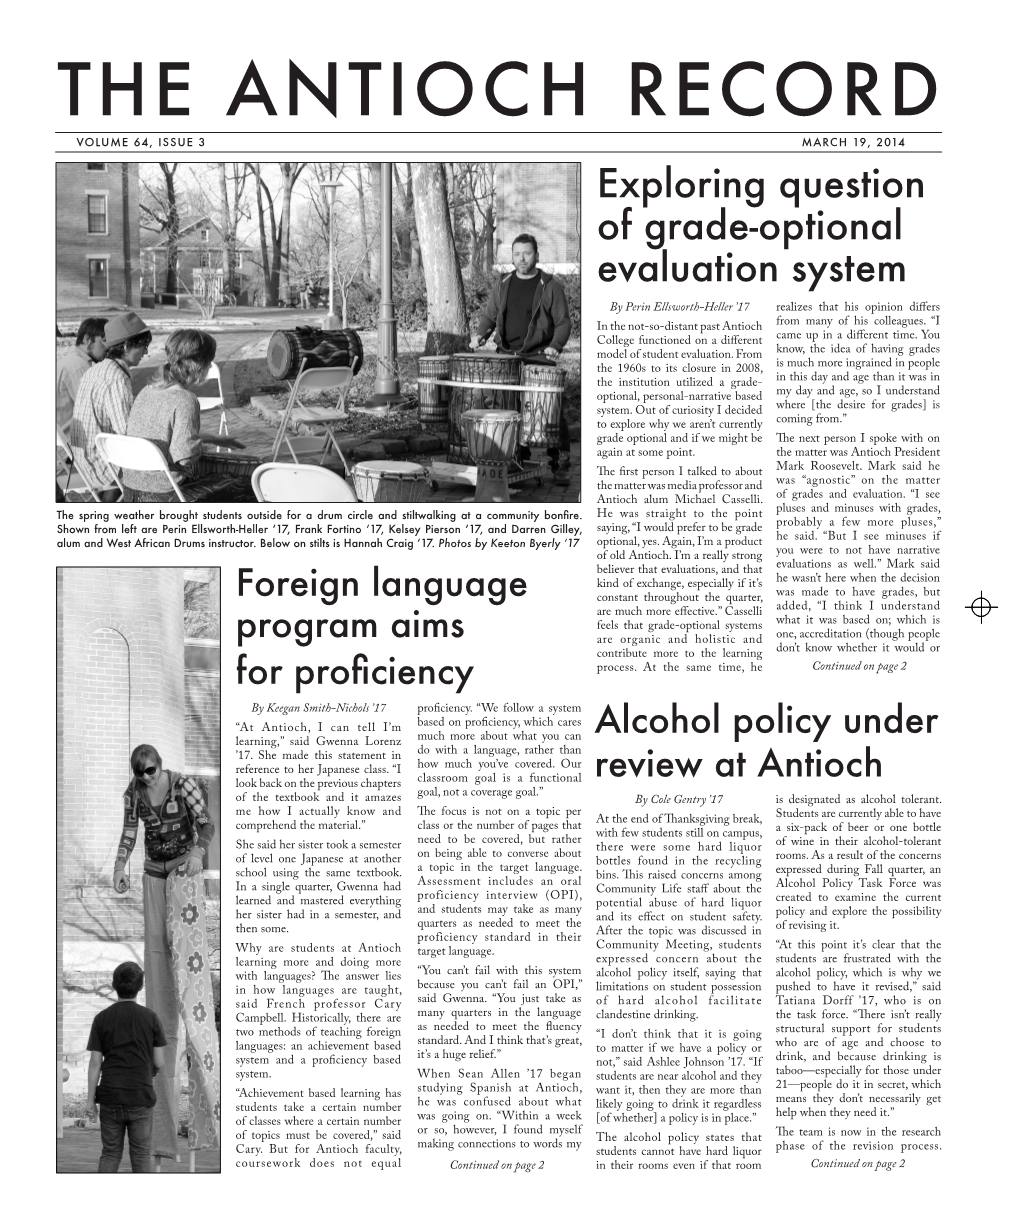 THE ANTIOCH RECORD VOLUME 64, ISSUE 3 MARCH 19, 2014 Exploring Question of Grade-Optional Evaluation System